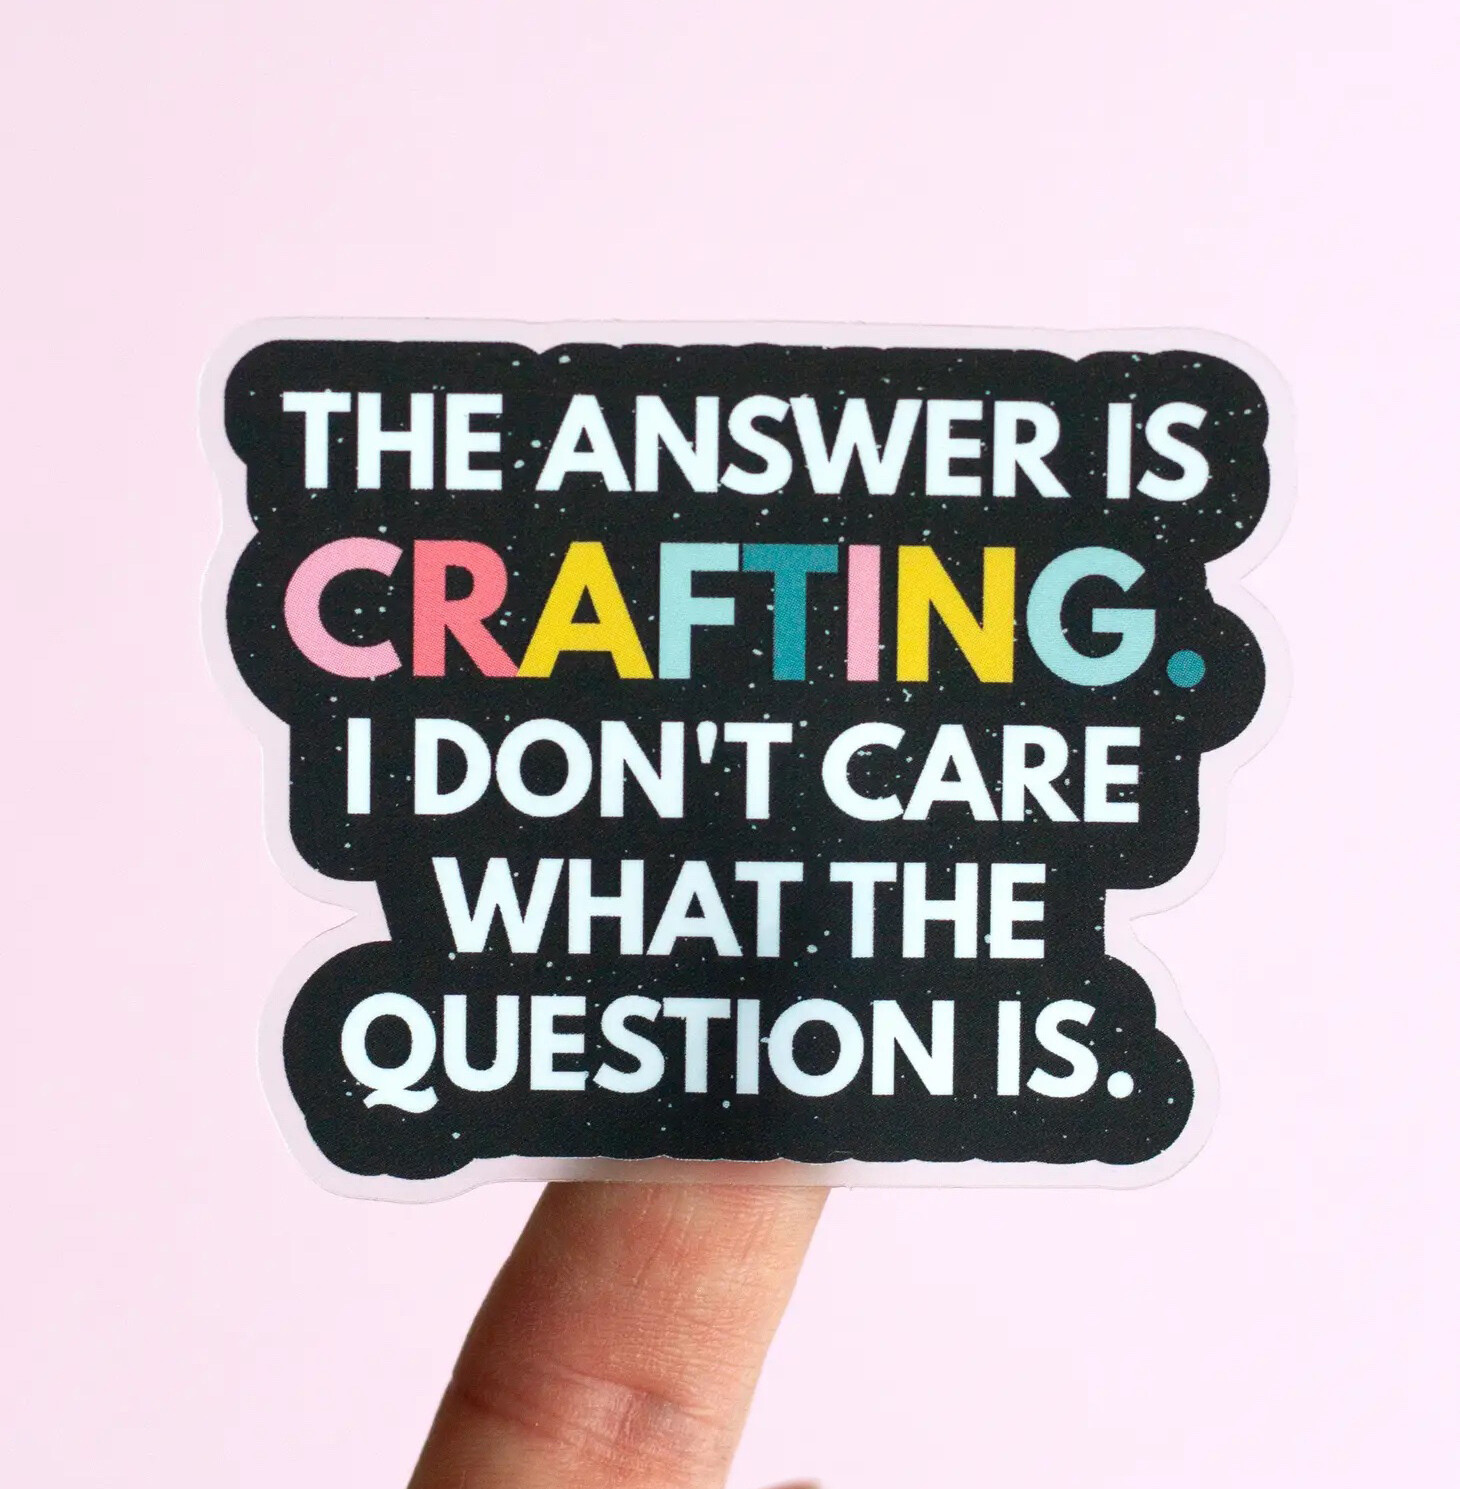 The Gray Muse "The Answer is Crafting. I Don't Care What the Question Is" Sticker